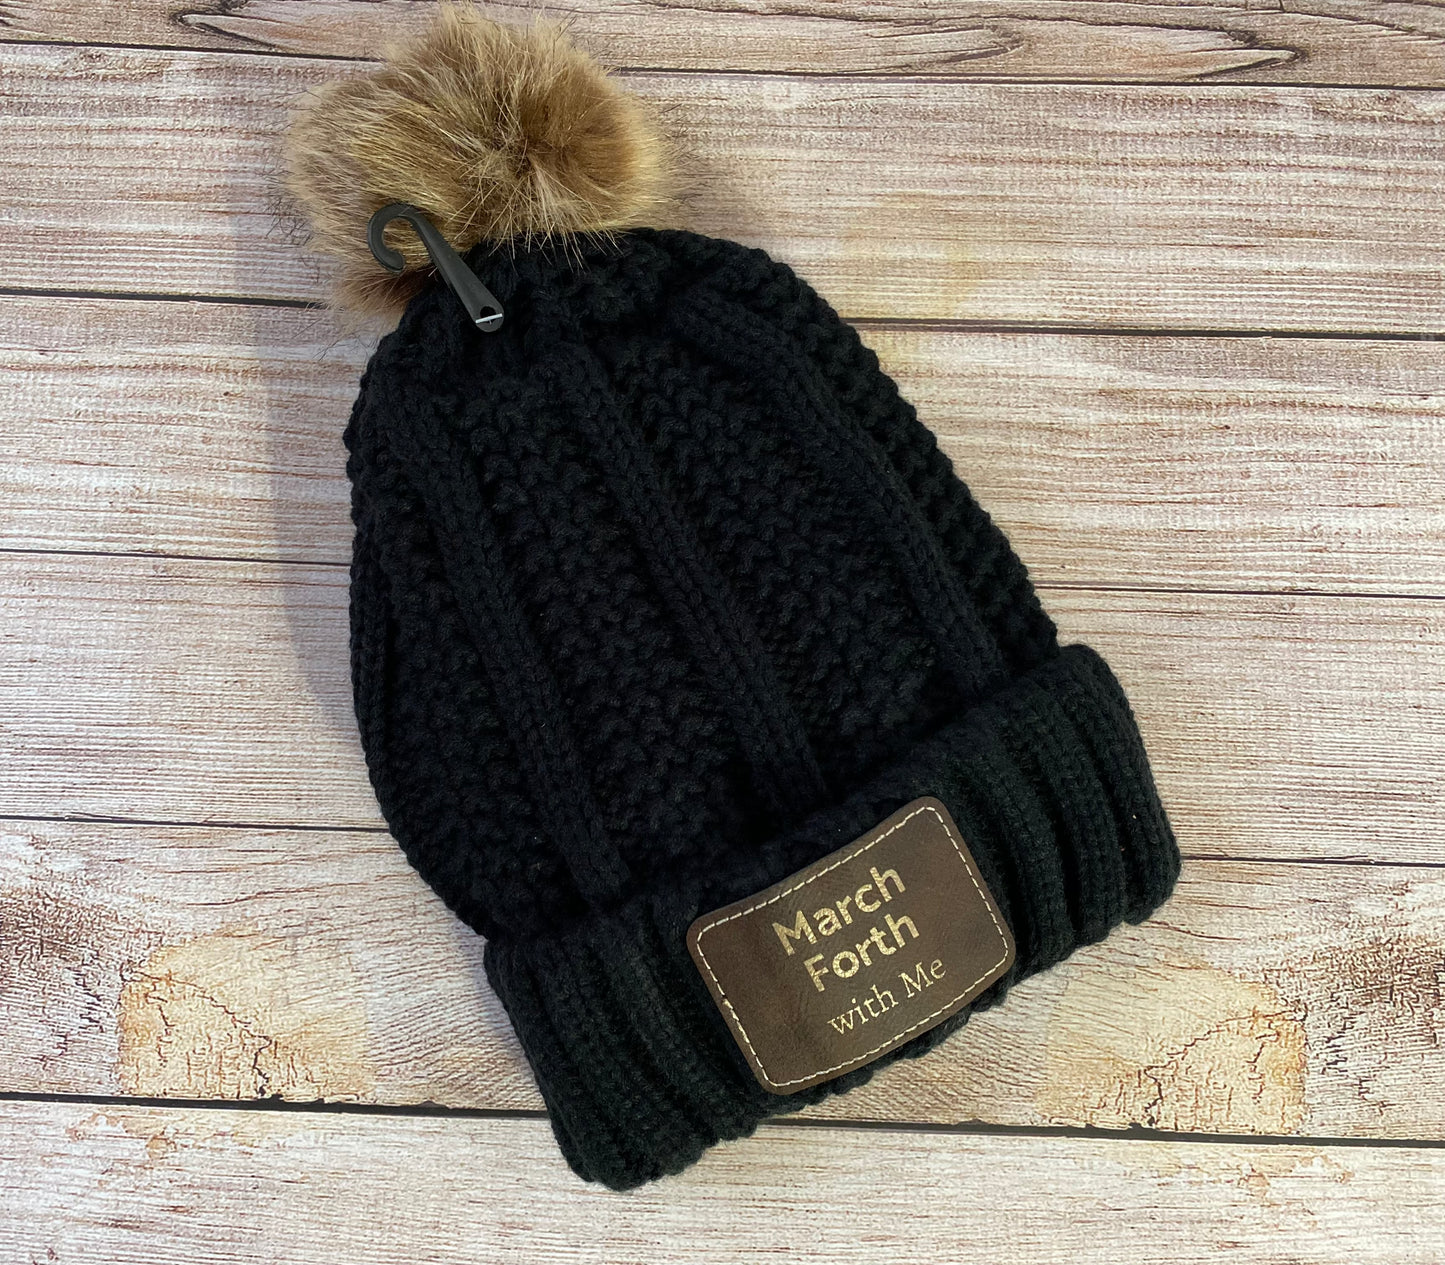 Personalized Winter Hat with Engraved Leatherette Patch, Fleece Lining and Faux Fur Pom Pom